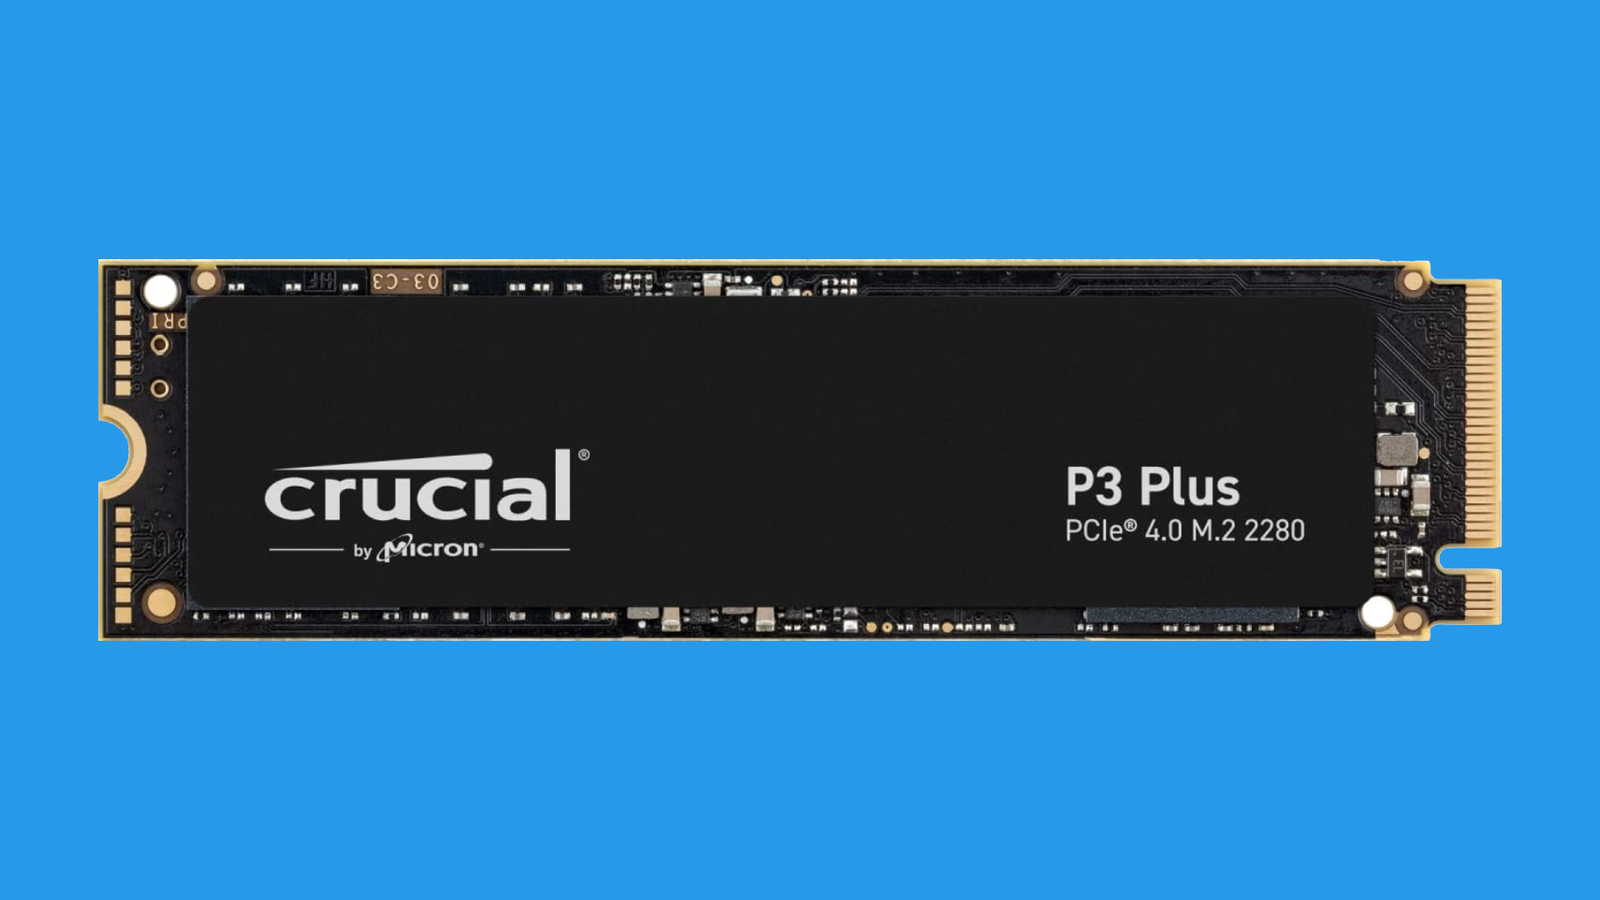 Grab a 1TB Crucial P3 Plus PCIe SSD for just £38 at